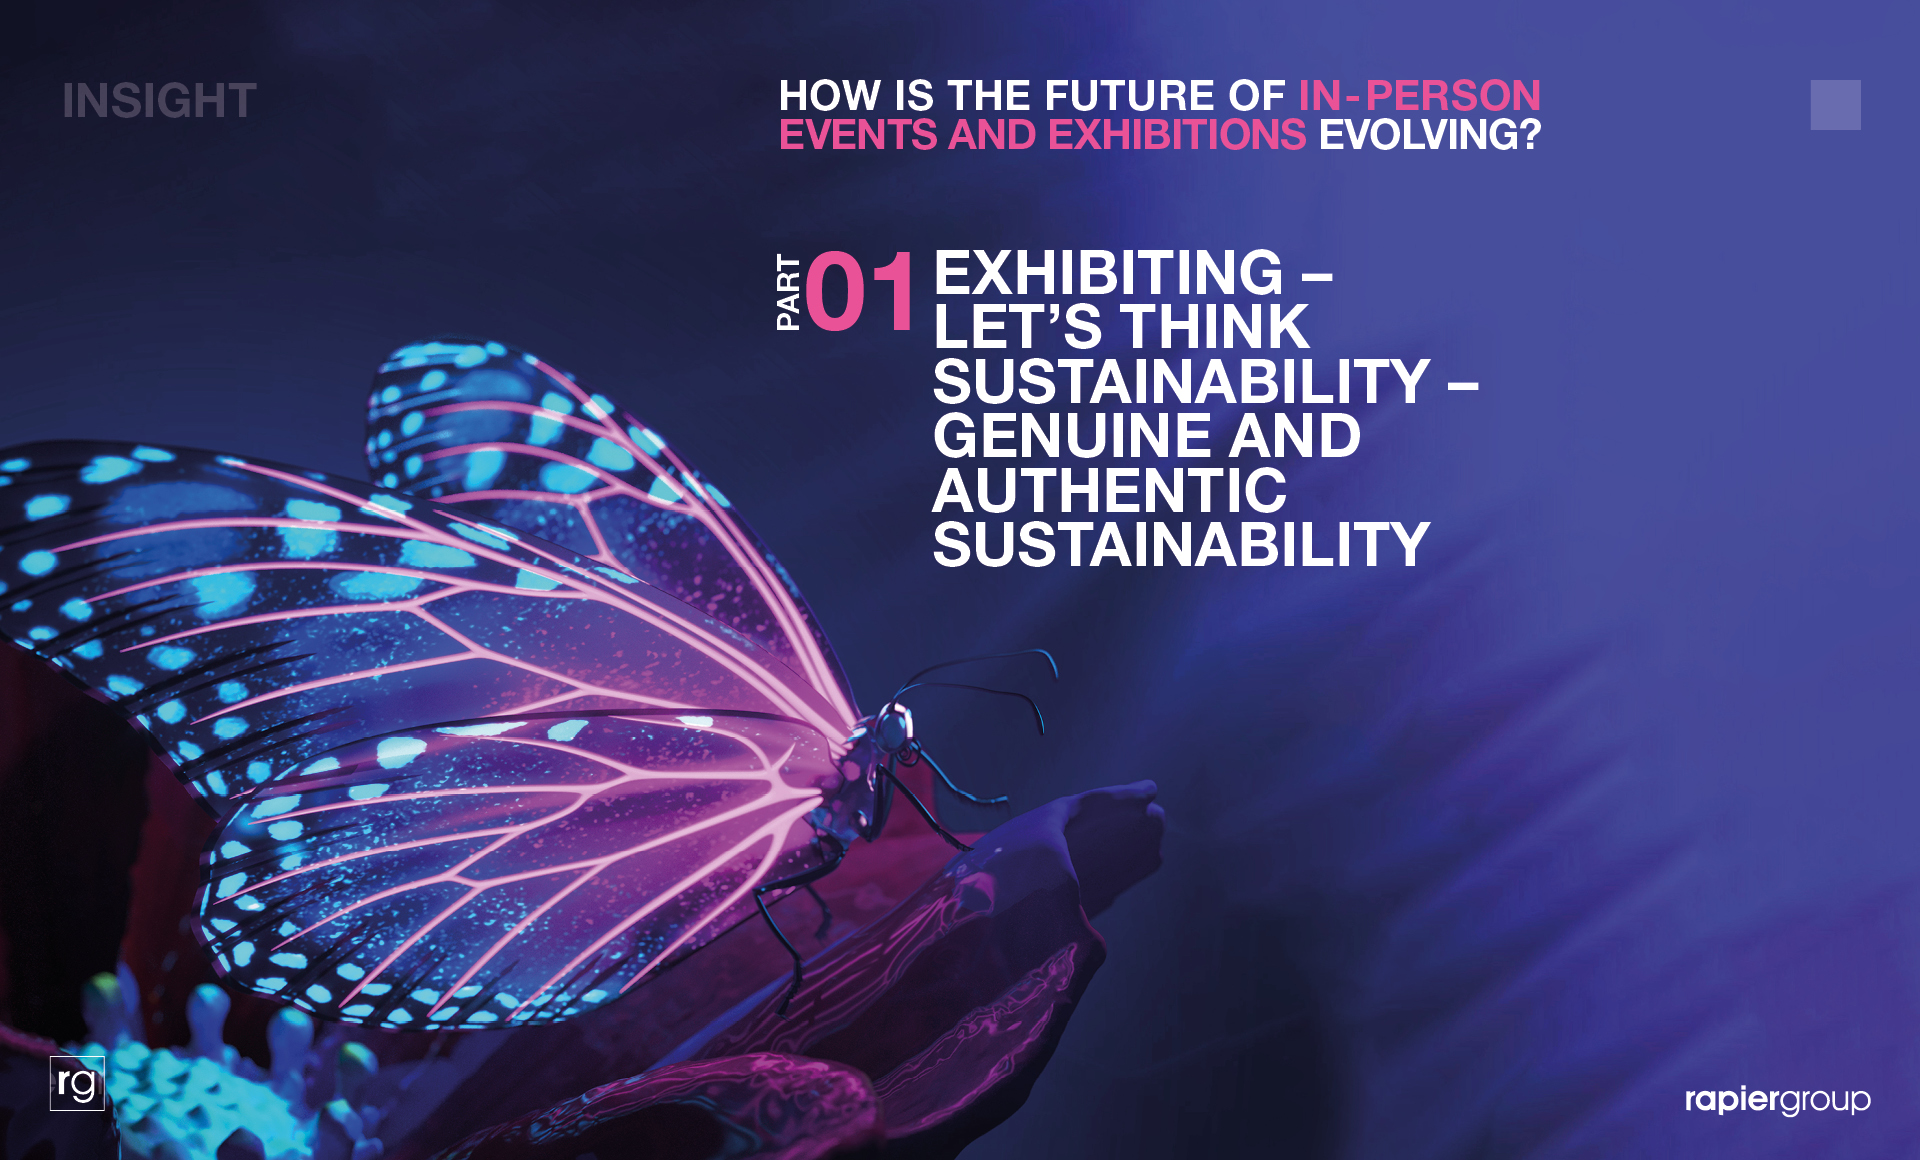 Exhibiting – Let’s think sustainability – genuine and authentic sustainability